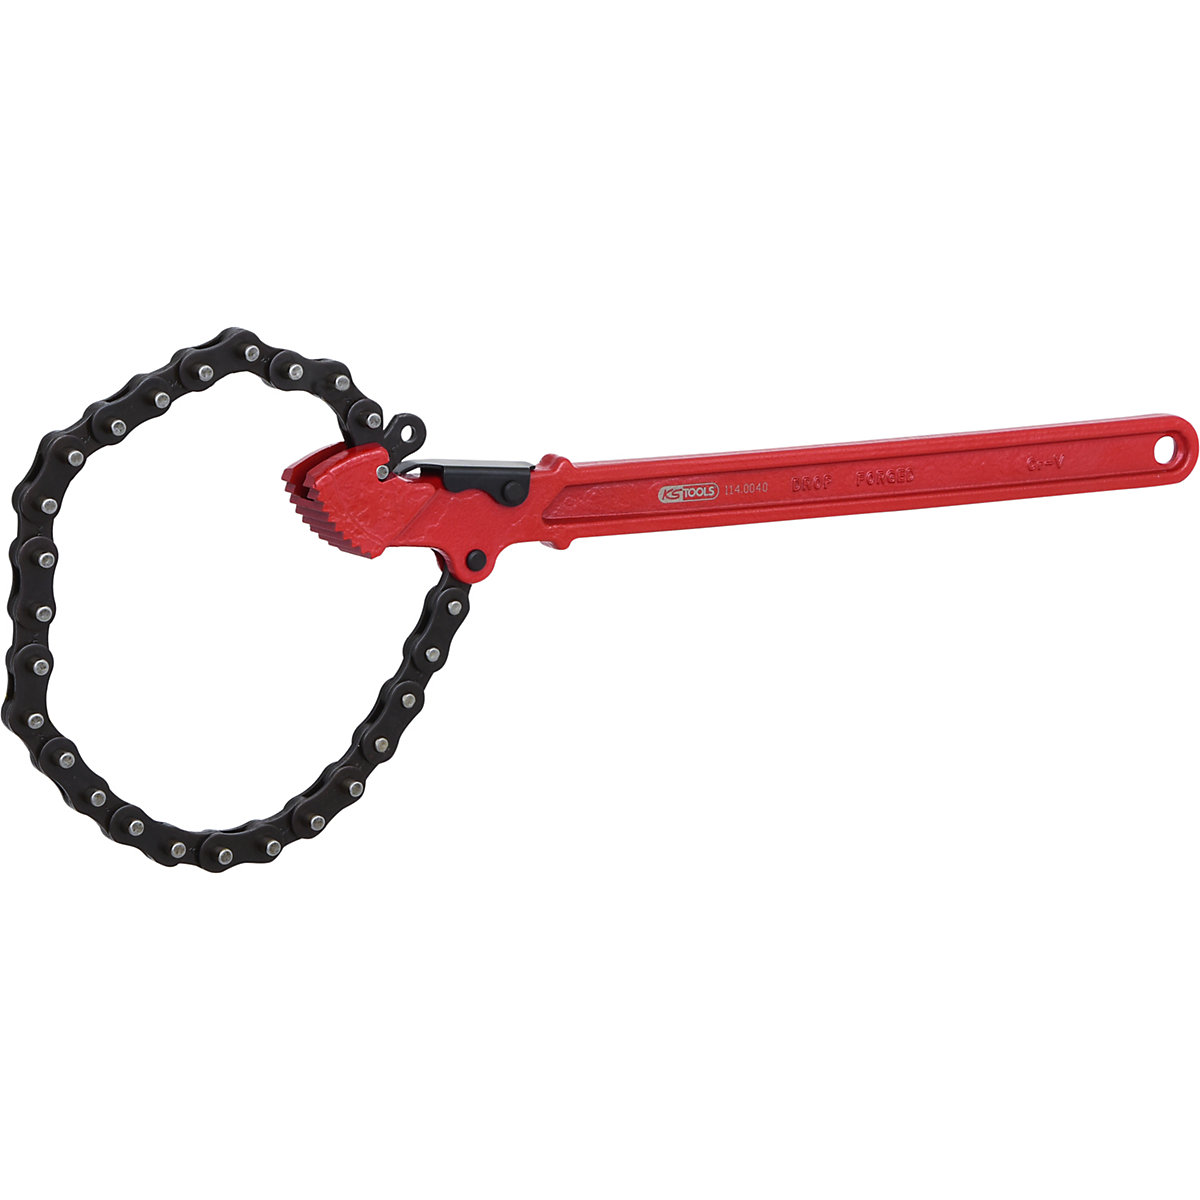 Chain pipe wrench – KS Tools